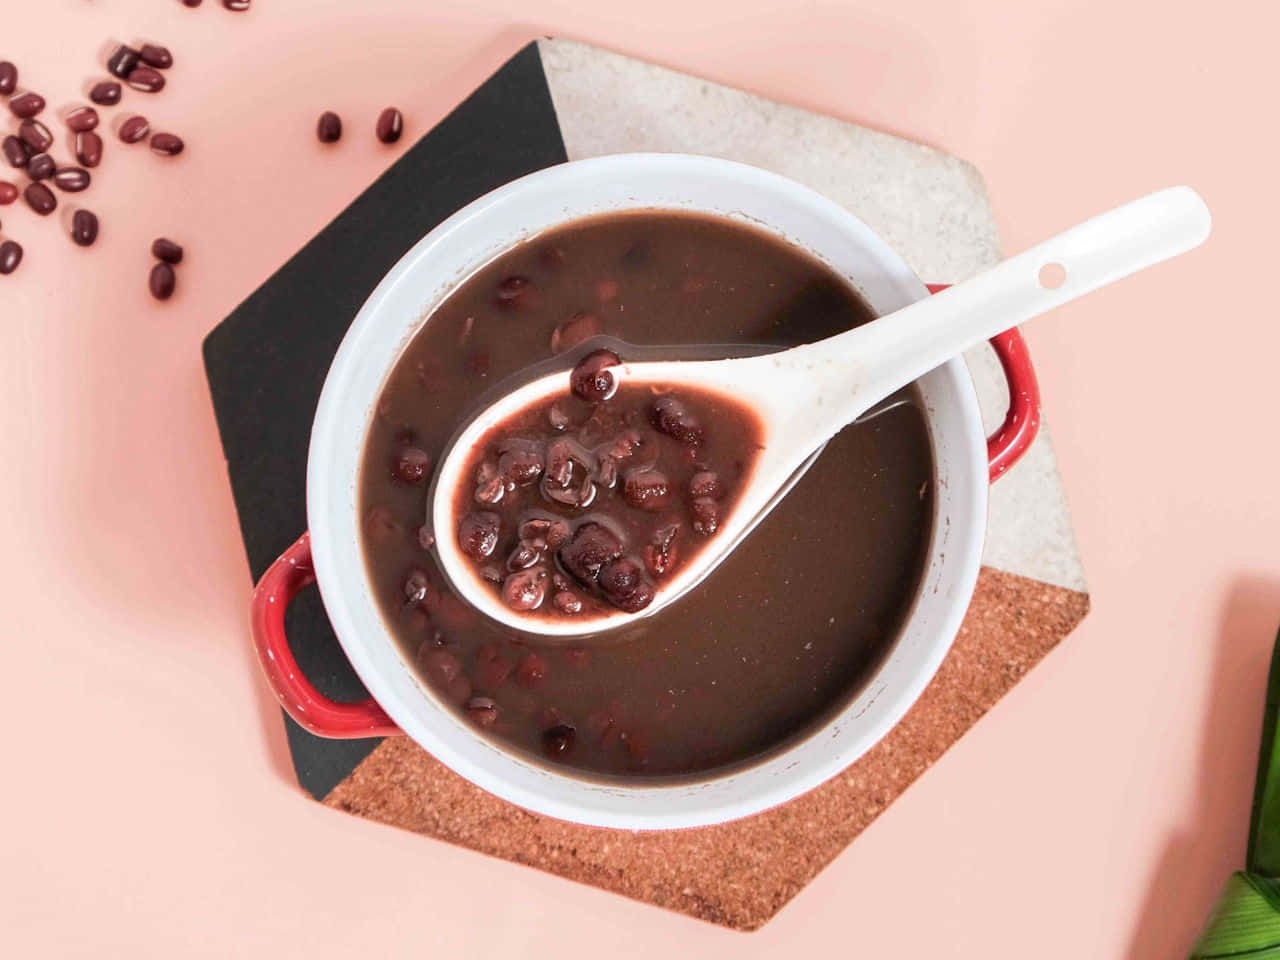 A close-up view of red beans on a spoon Wallpaper